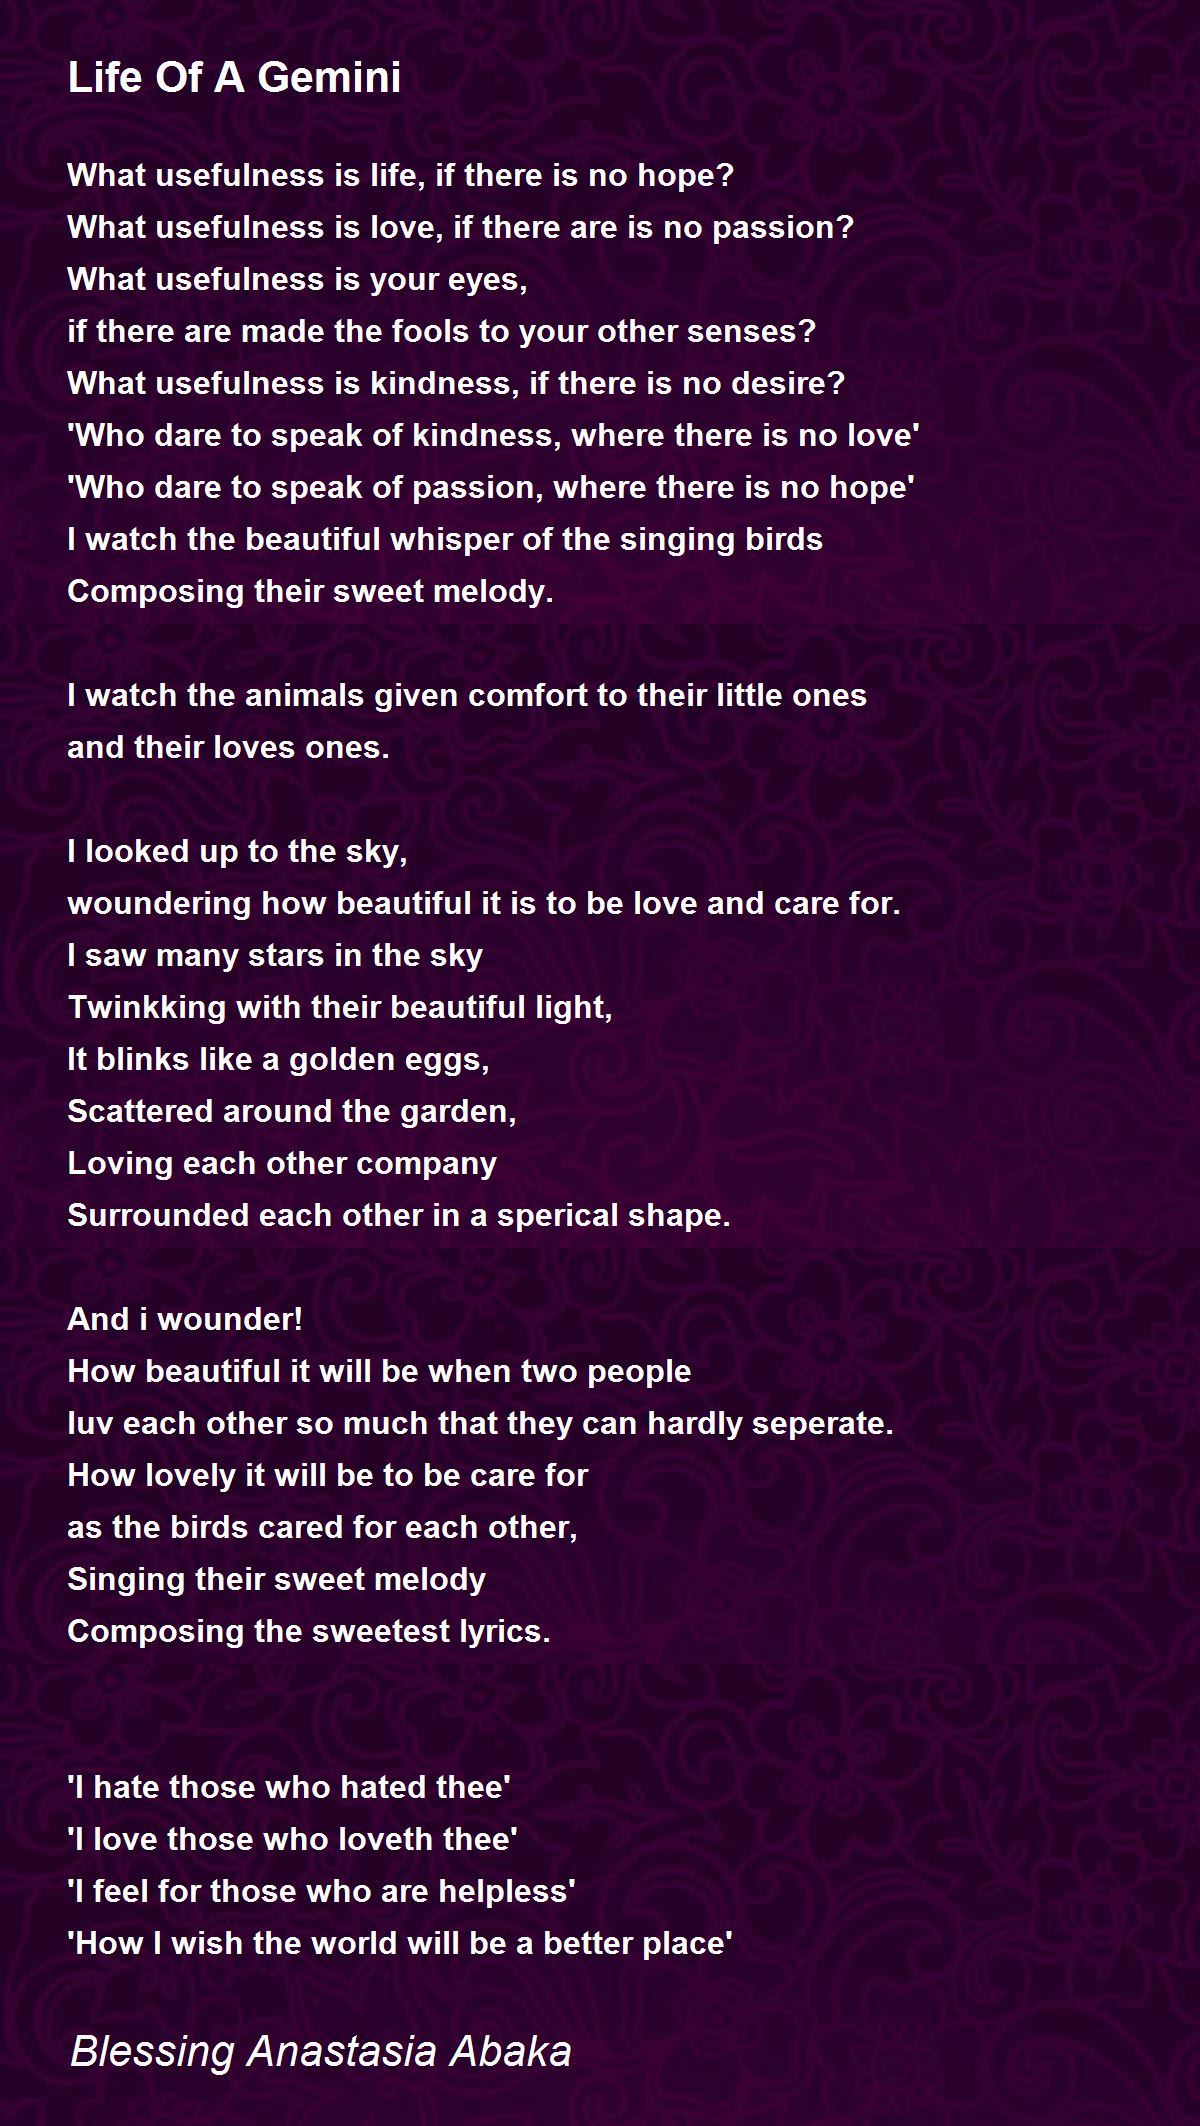 Life Of A Gemini - Life Of A Gemini Poem by Blessing Anastasia Abaka